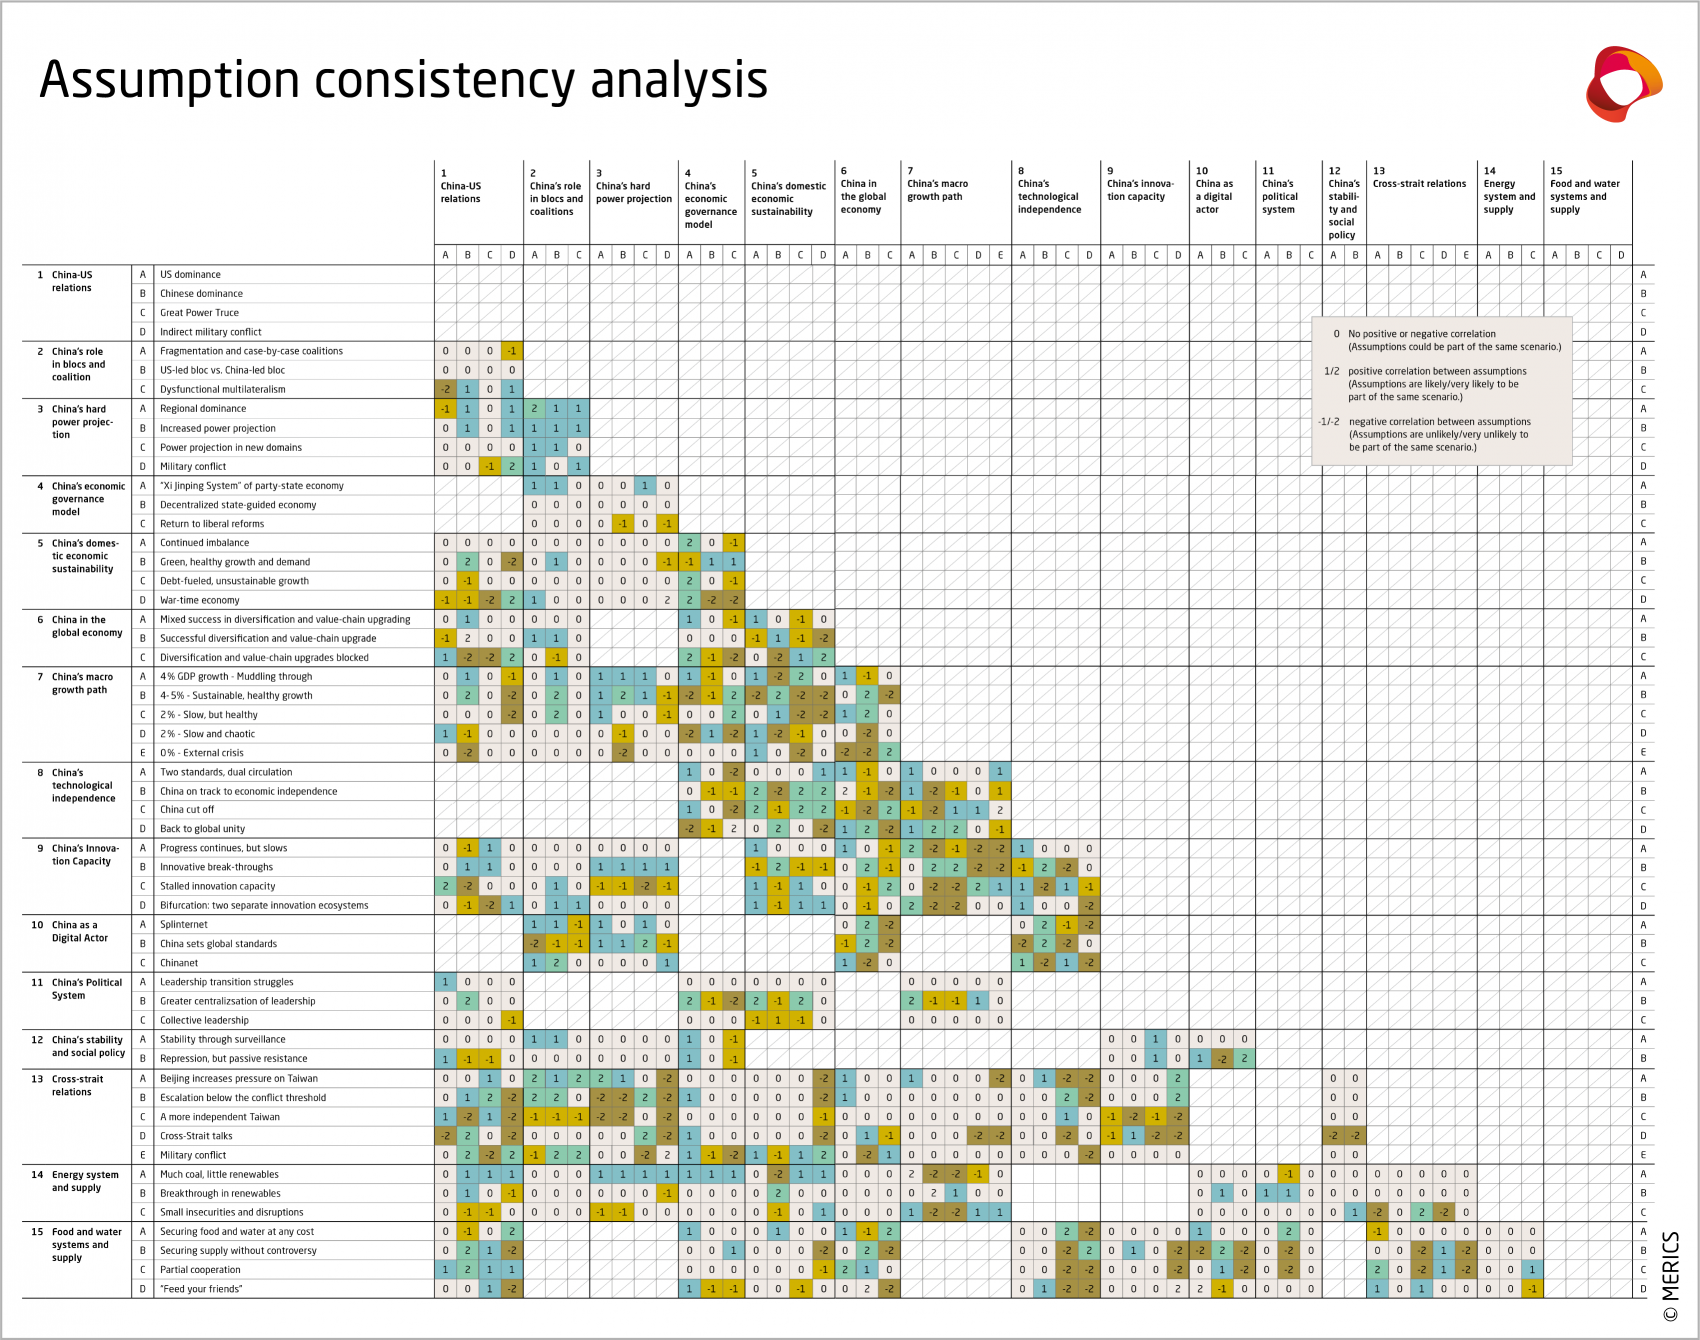 Table 2: Assumption consistency analysis